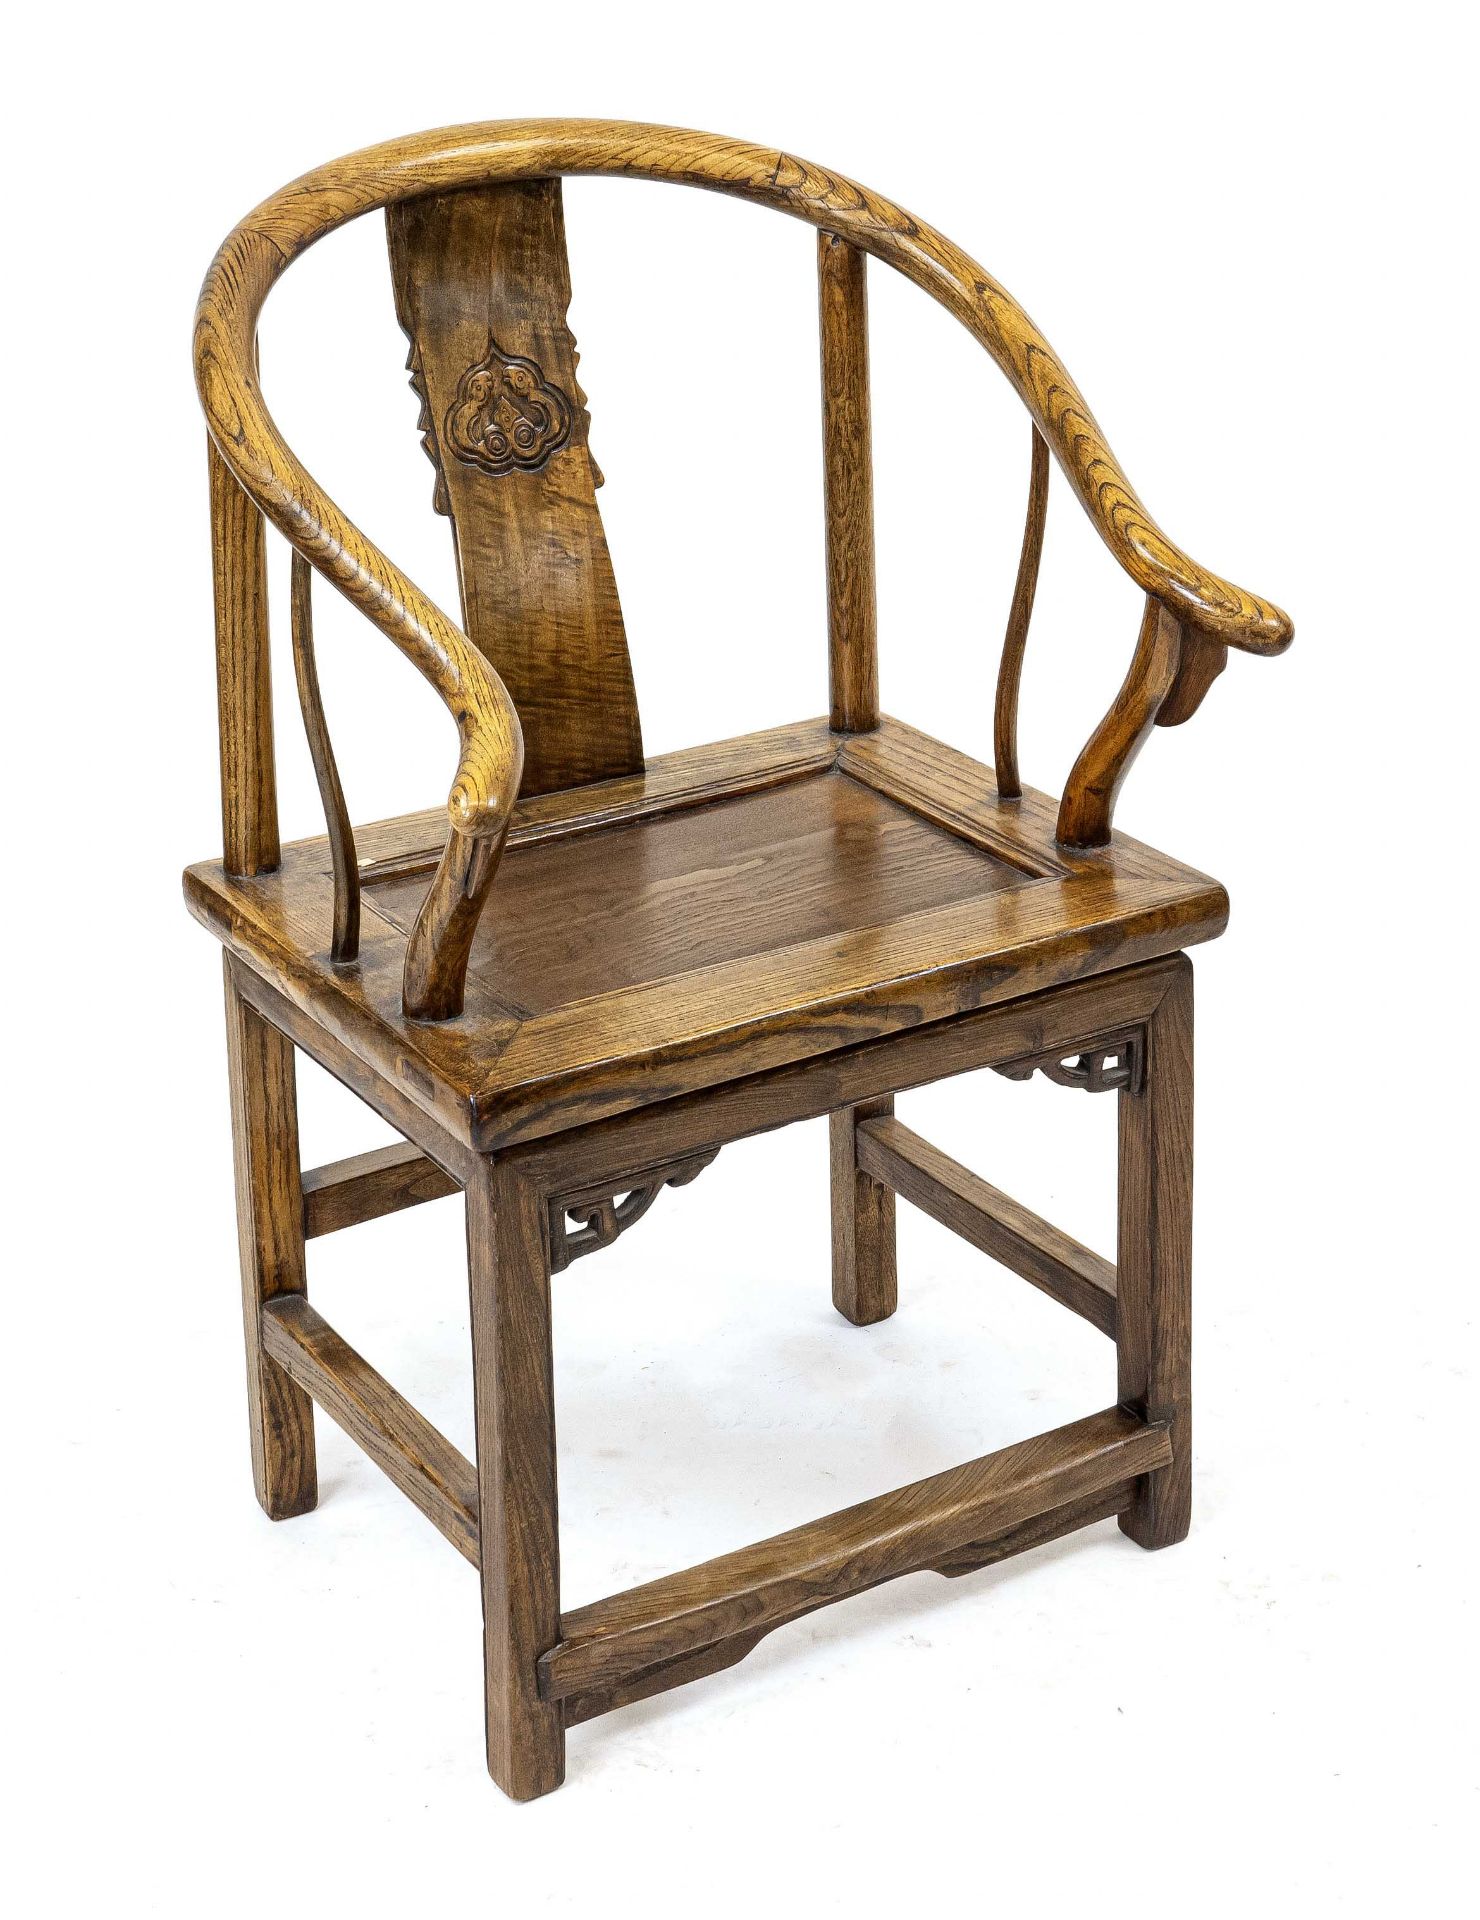 Asian chair from around 1900, ash, 97 x 60 x 44 cm